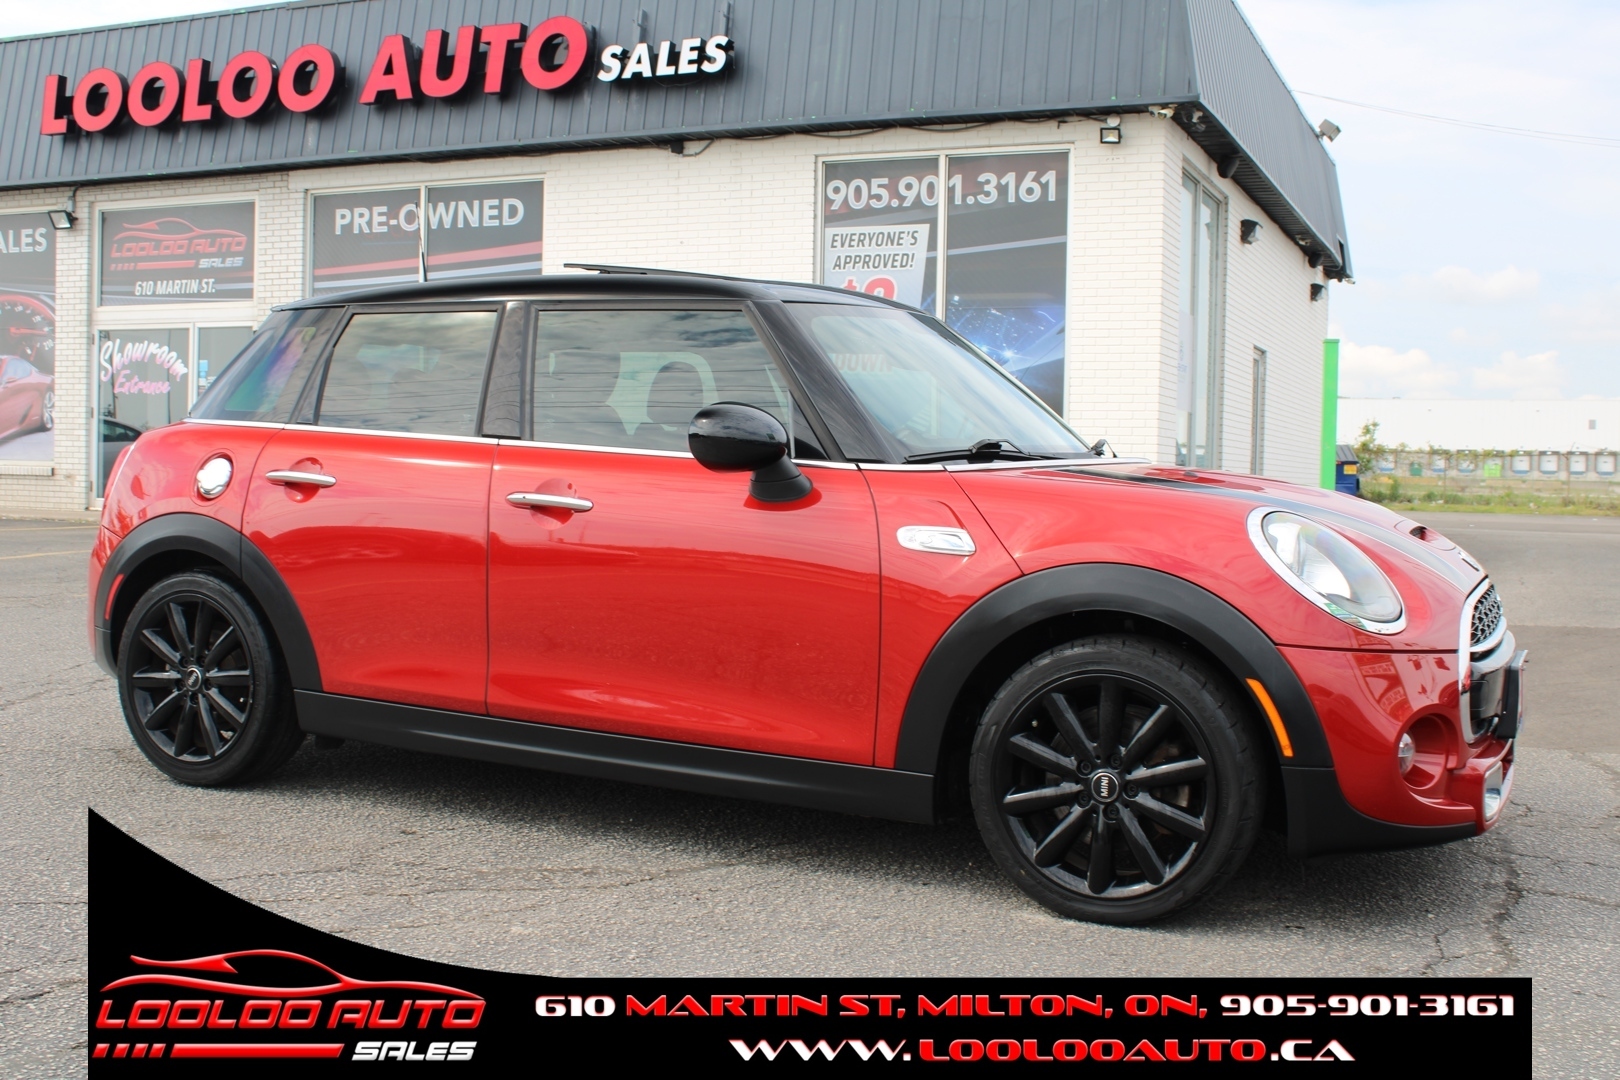 2016 MINI Cooper S Automatic Heads Up Display Navigation $79/Weekly